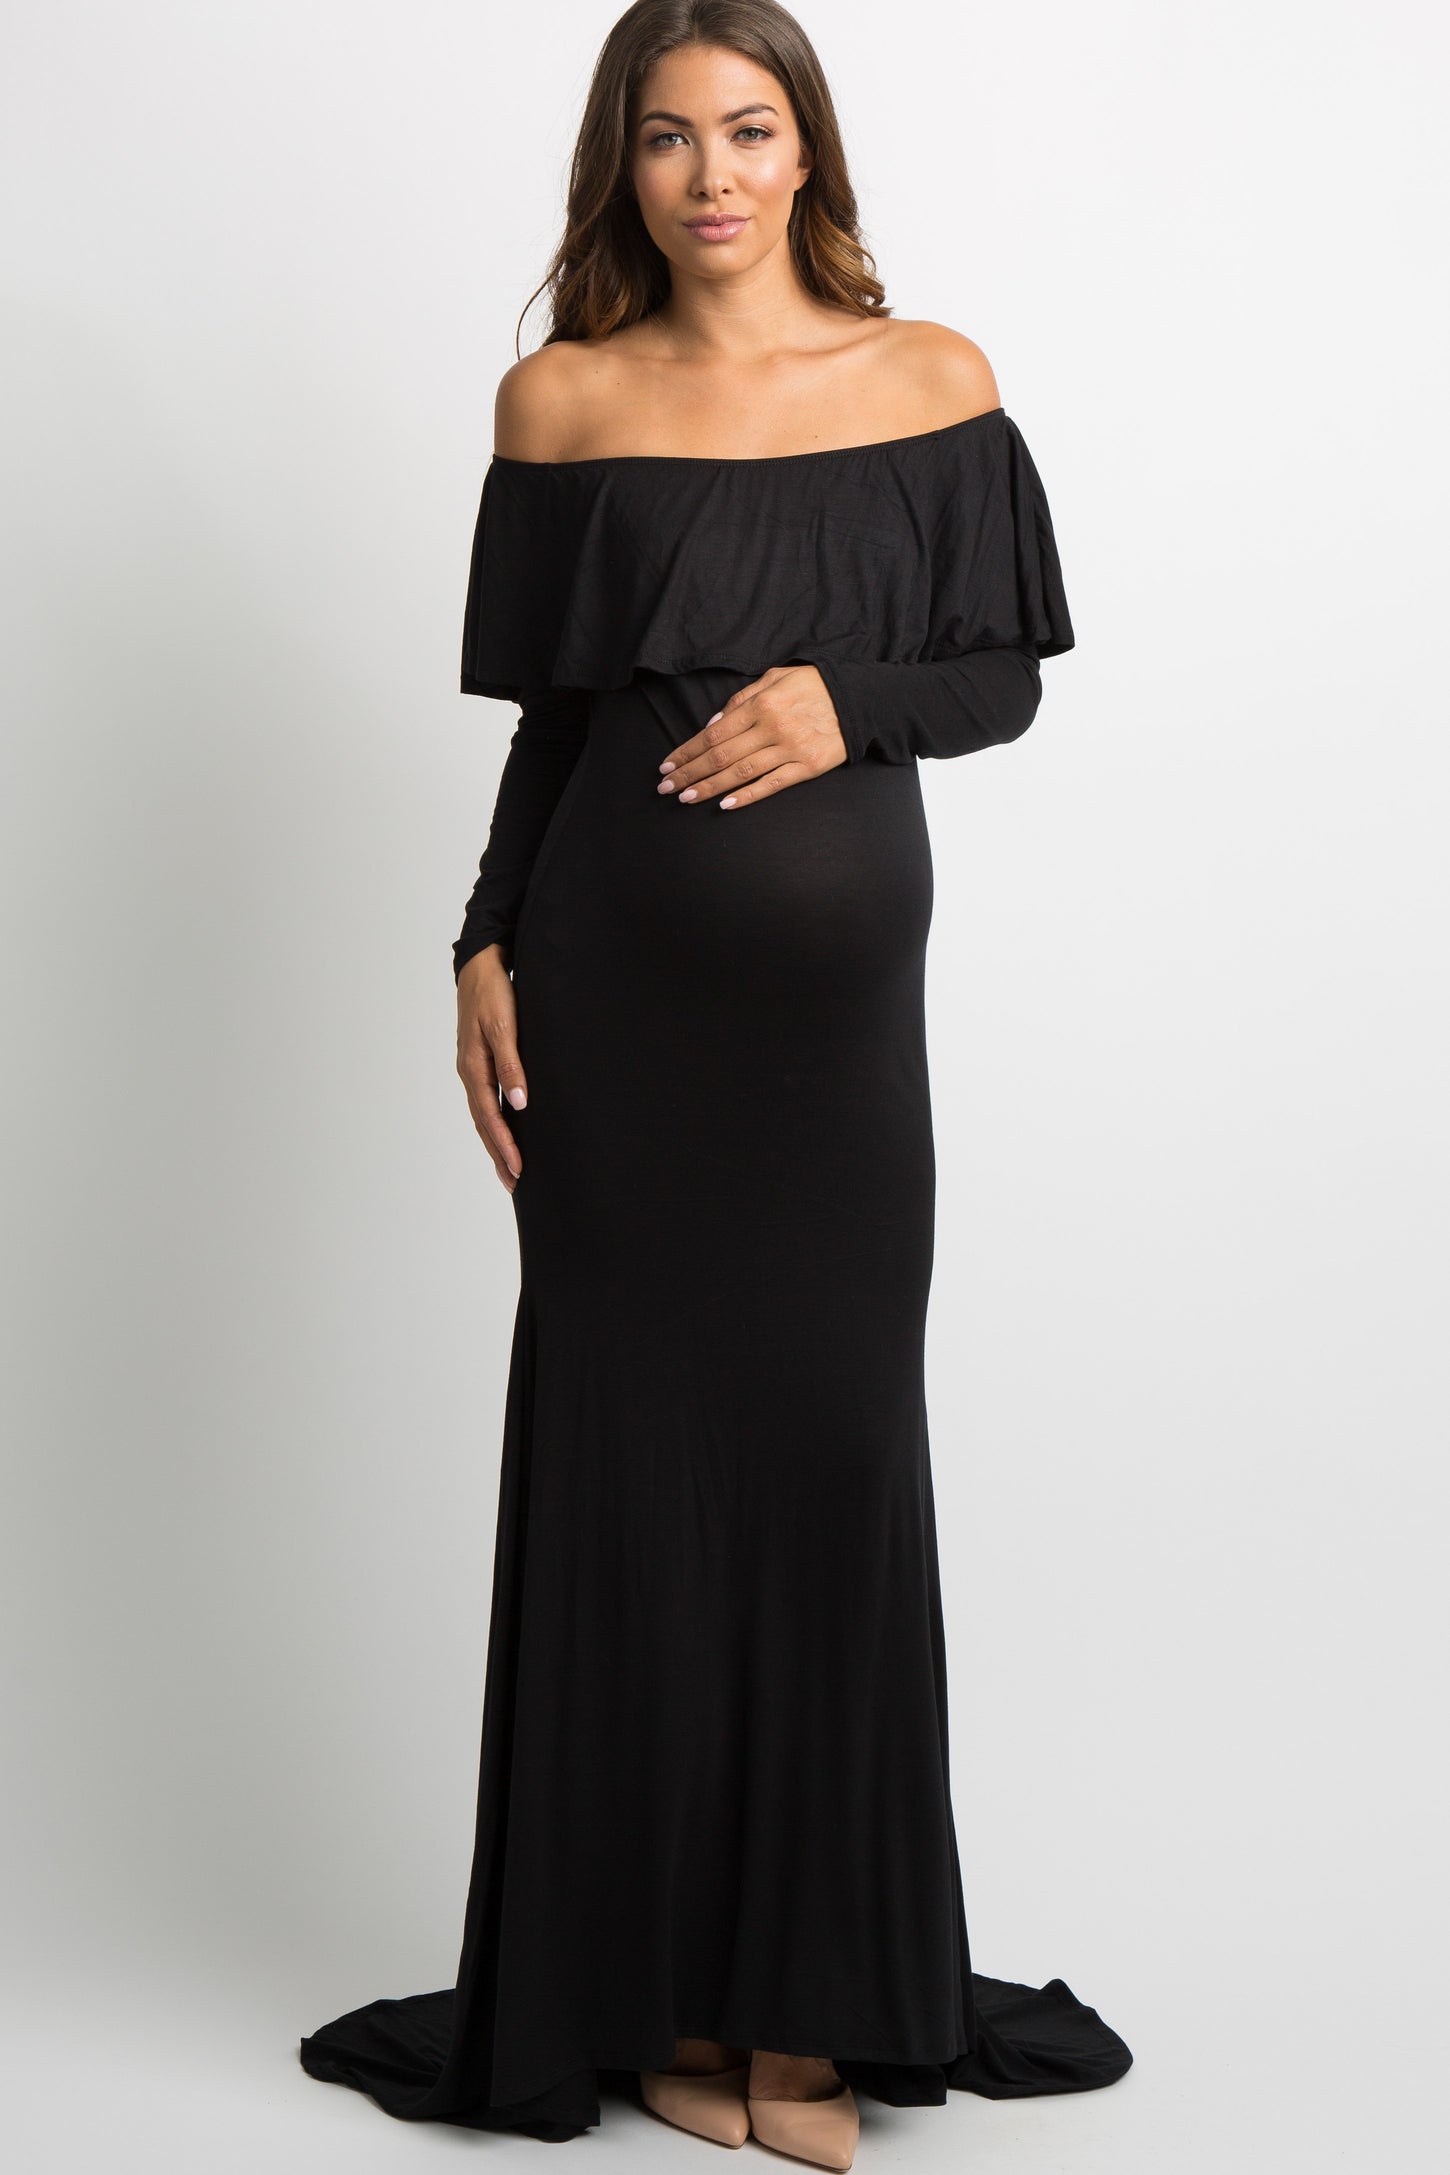 Black Off Shoulder Ruffle Maternity Photoshoot Gown/Dress